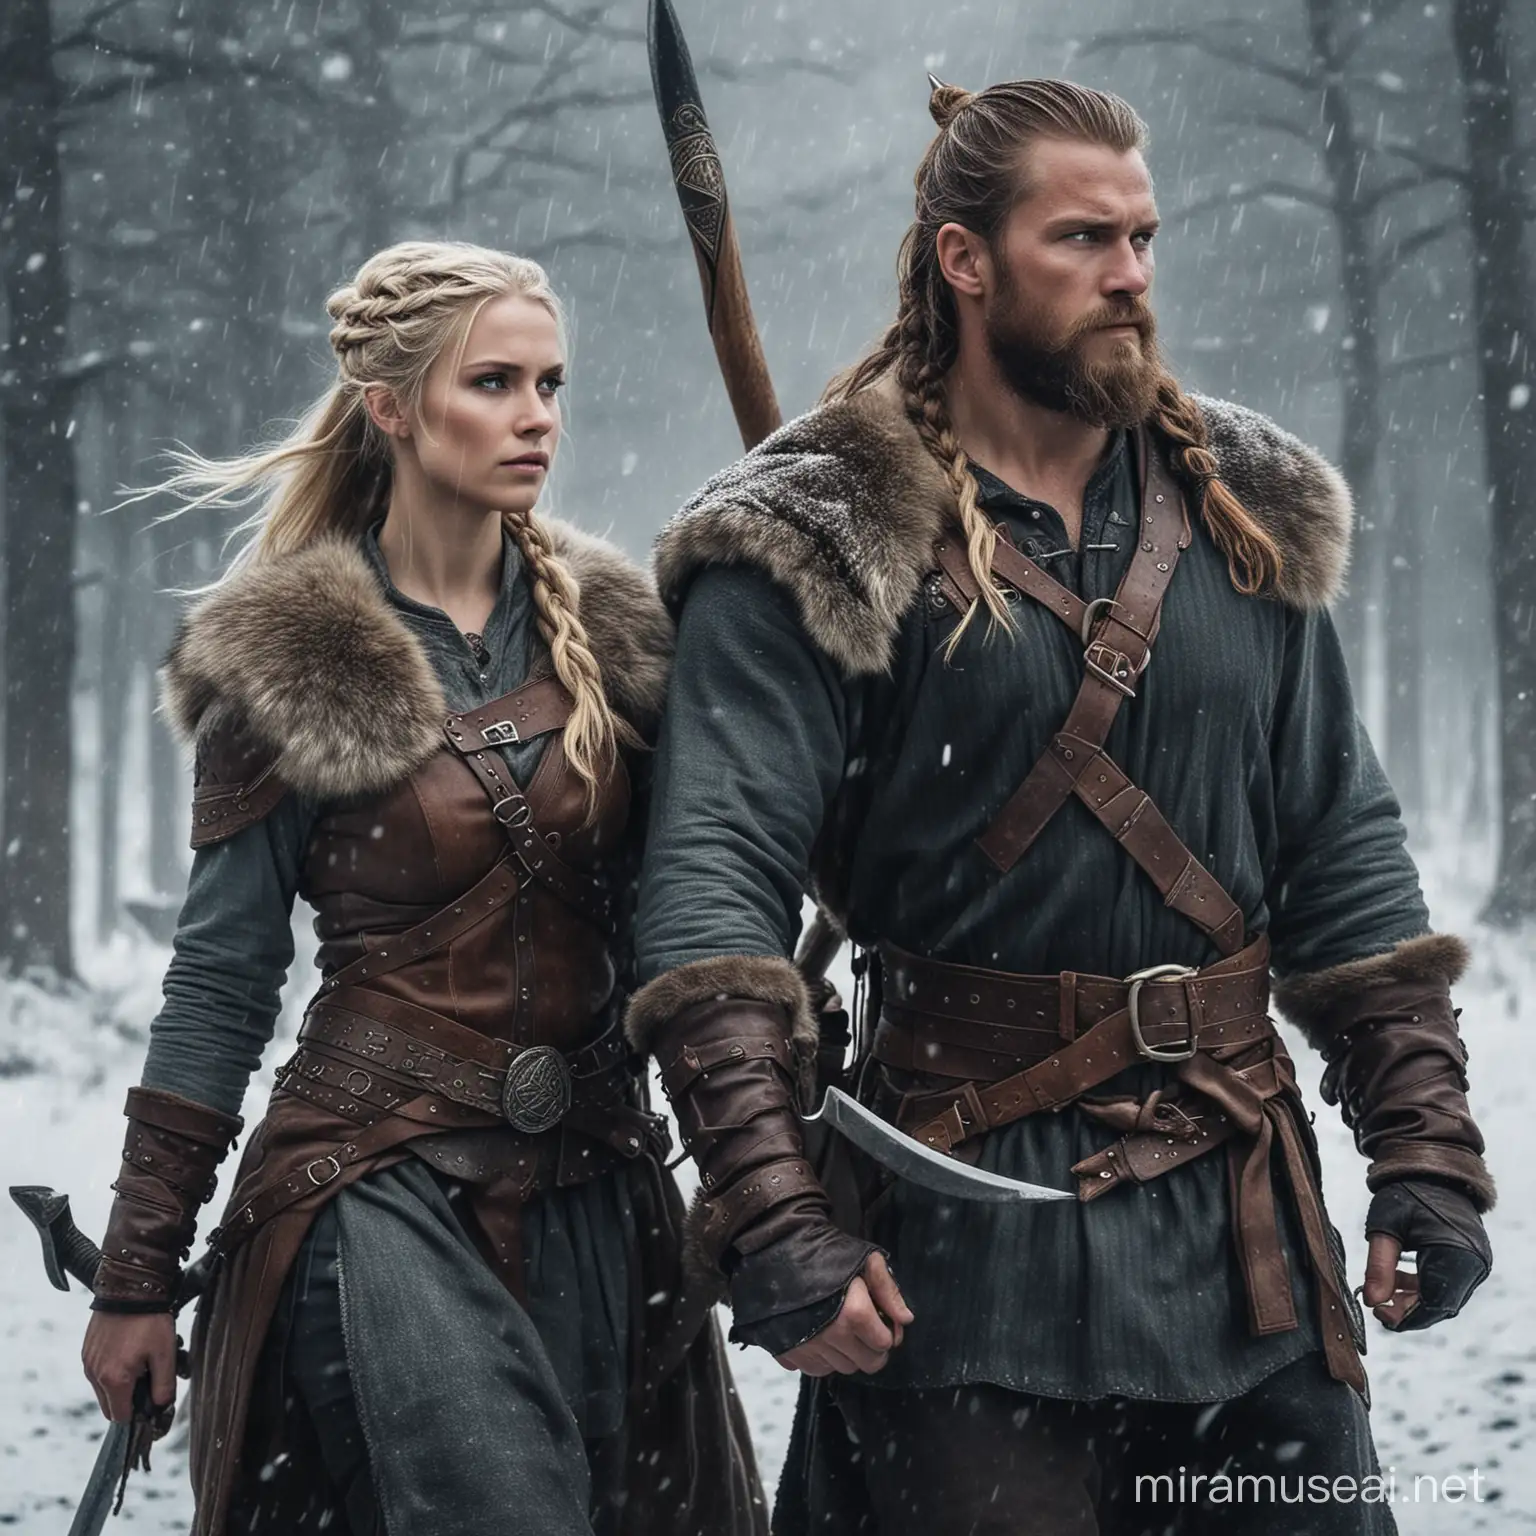 Imagine yourself as a Viking couple warrior a man with a viking warior woman ,in the midst of a blizzard. Describe your appearance, including your weapon of choice and any unique characteristics